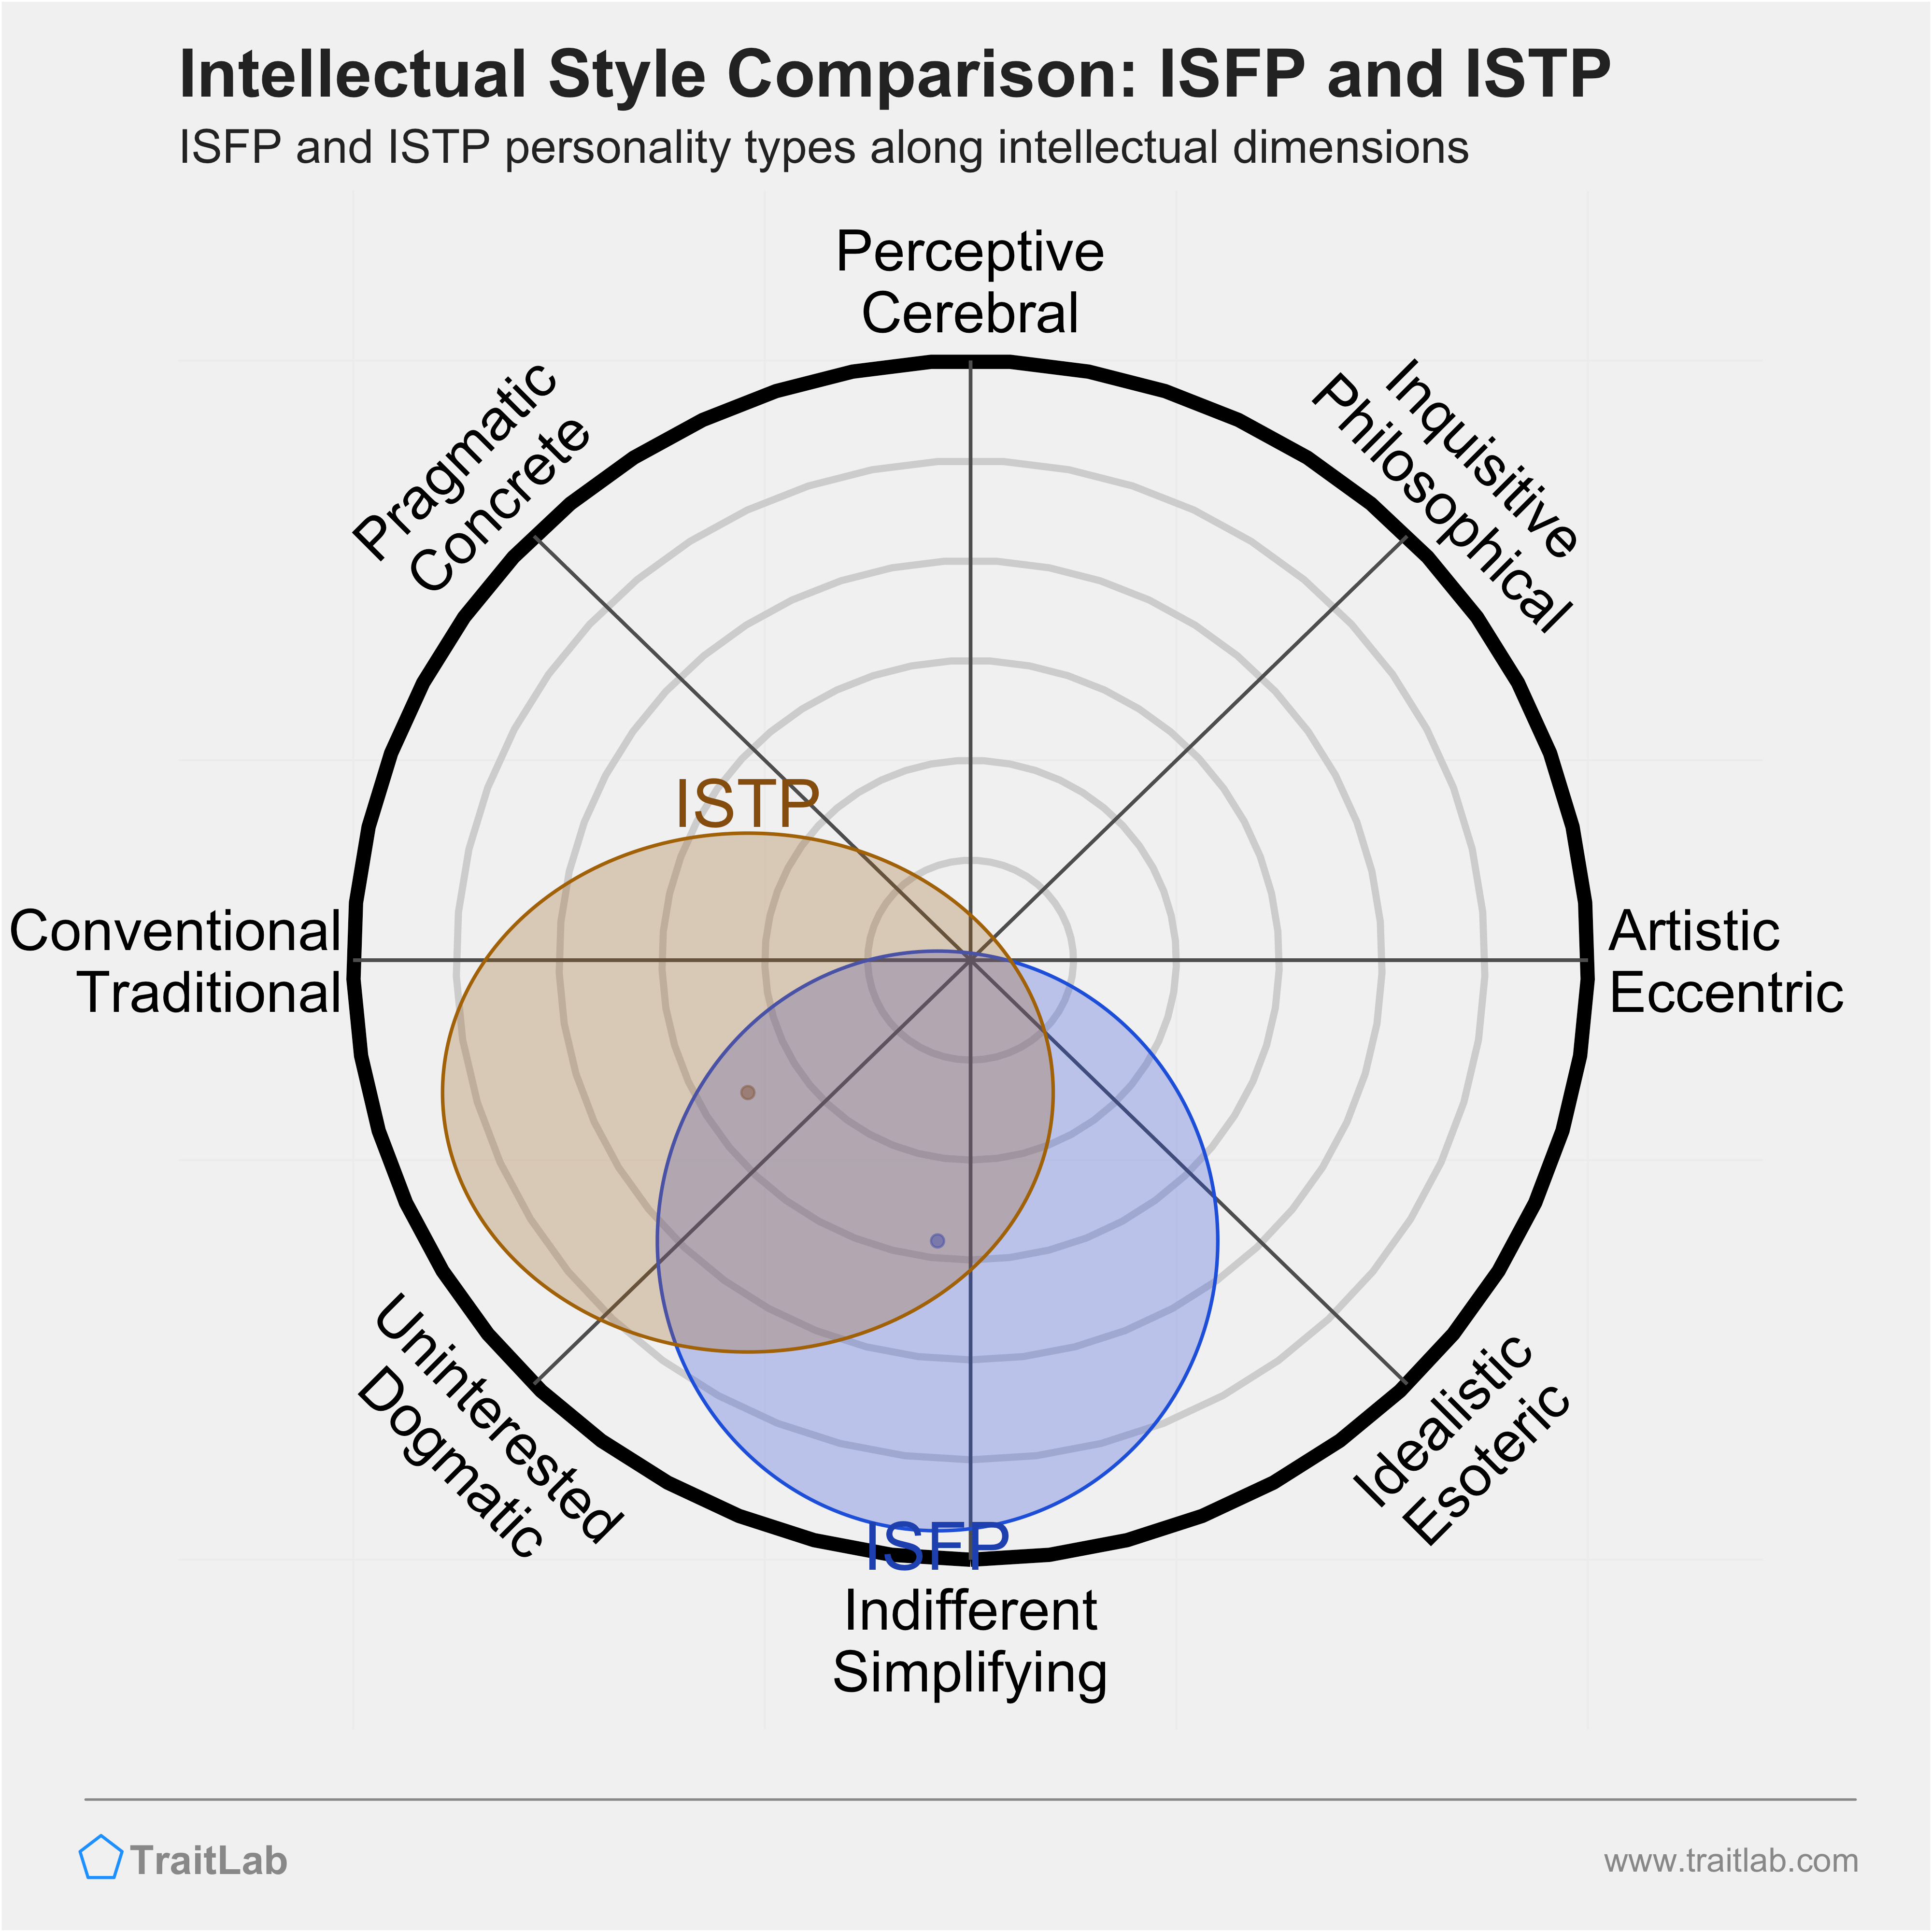 ISFP and ISTP comparison across intellectual dimensions